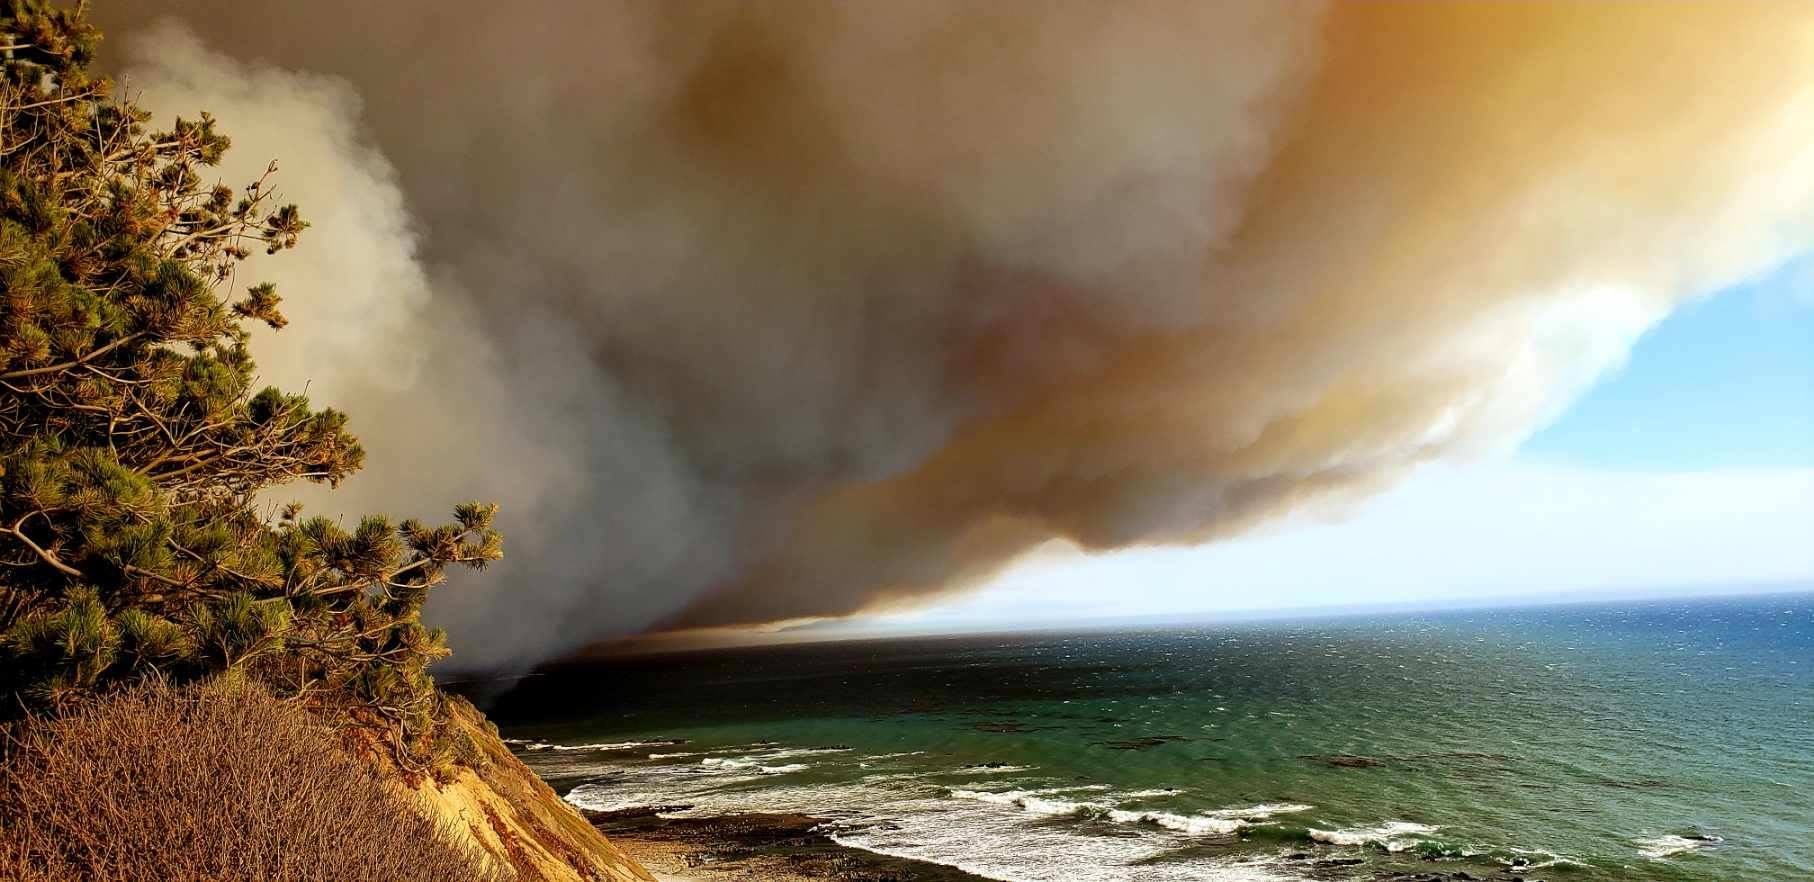 Thick brown smoke billows from a wildfire off of a cliff from the left with a contrasting blue ocean to the right.